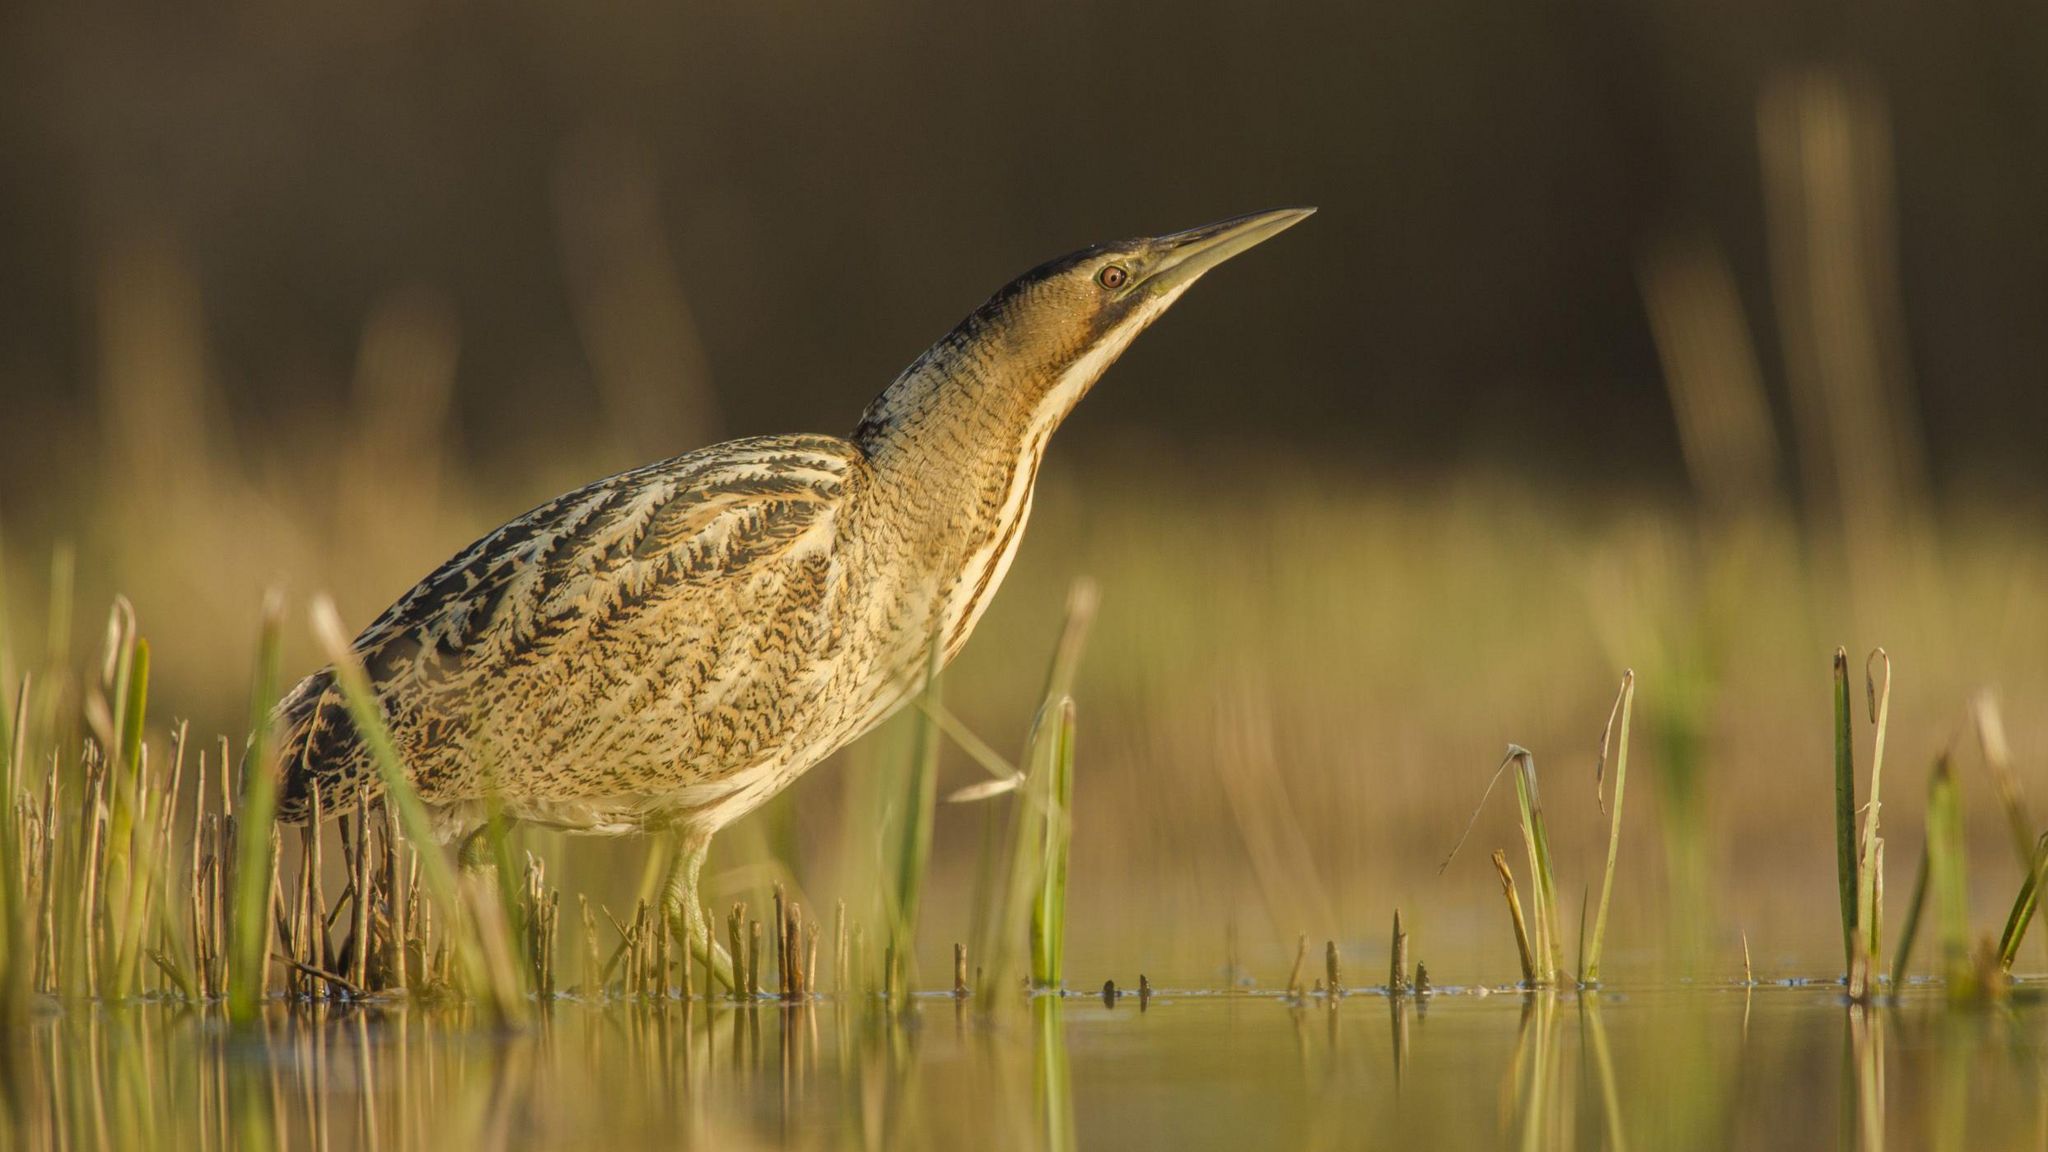 Bittern standing in pond with reeds